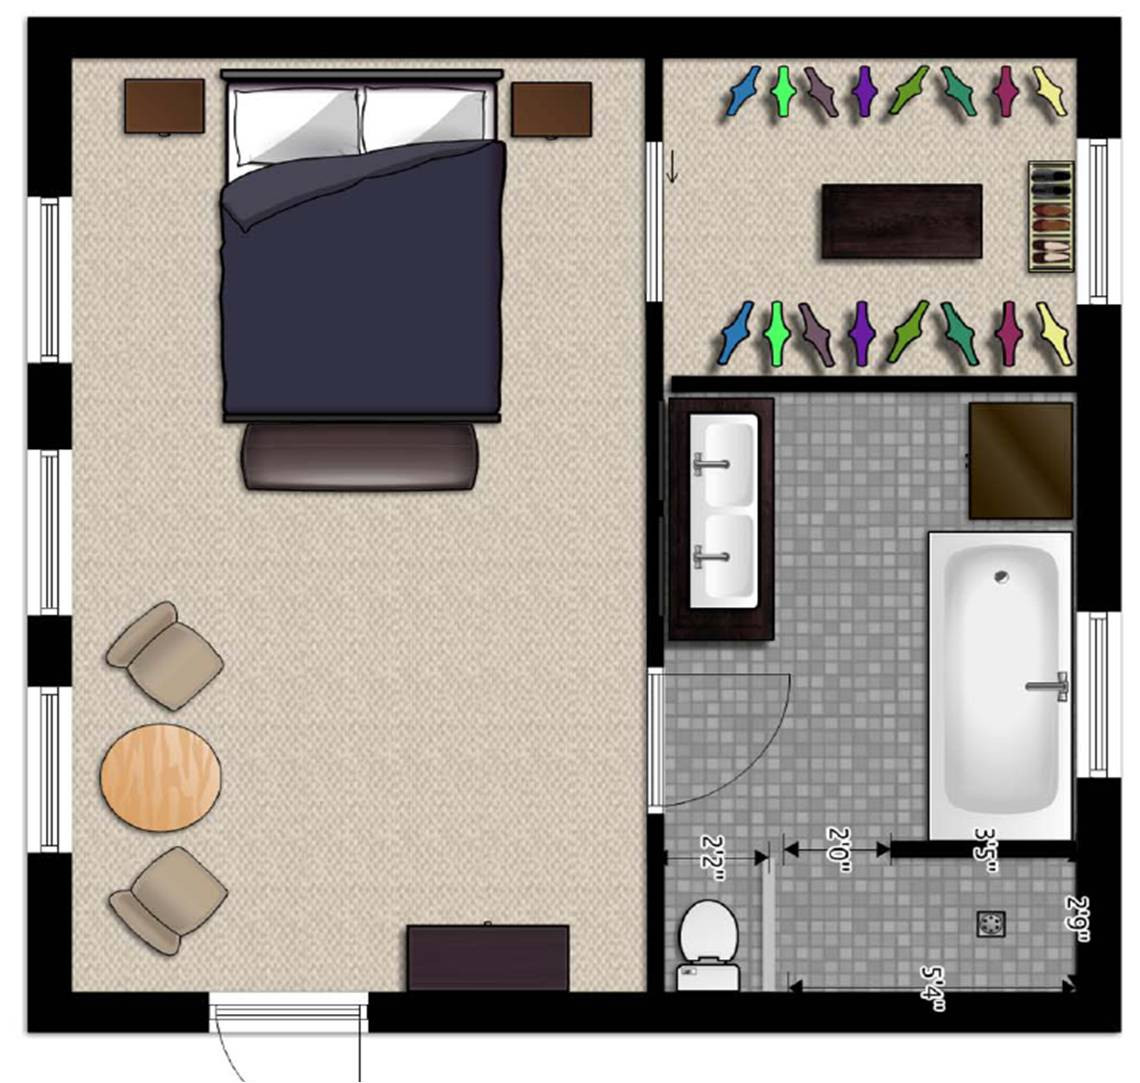 Small Bedroom Floor Plan
 Tips on how to renovate build or a perfect home Part